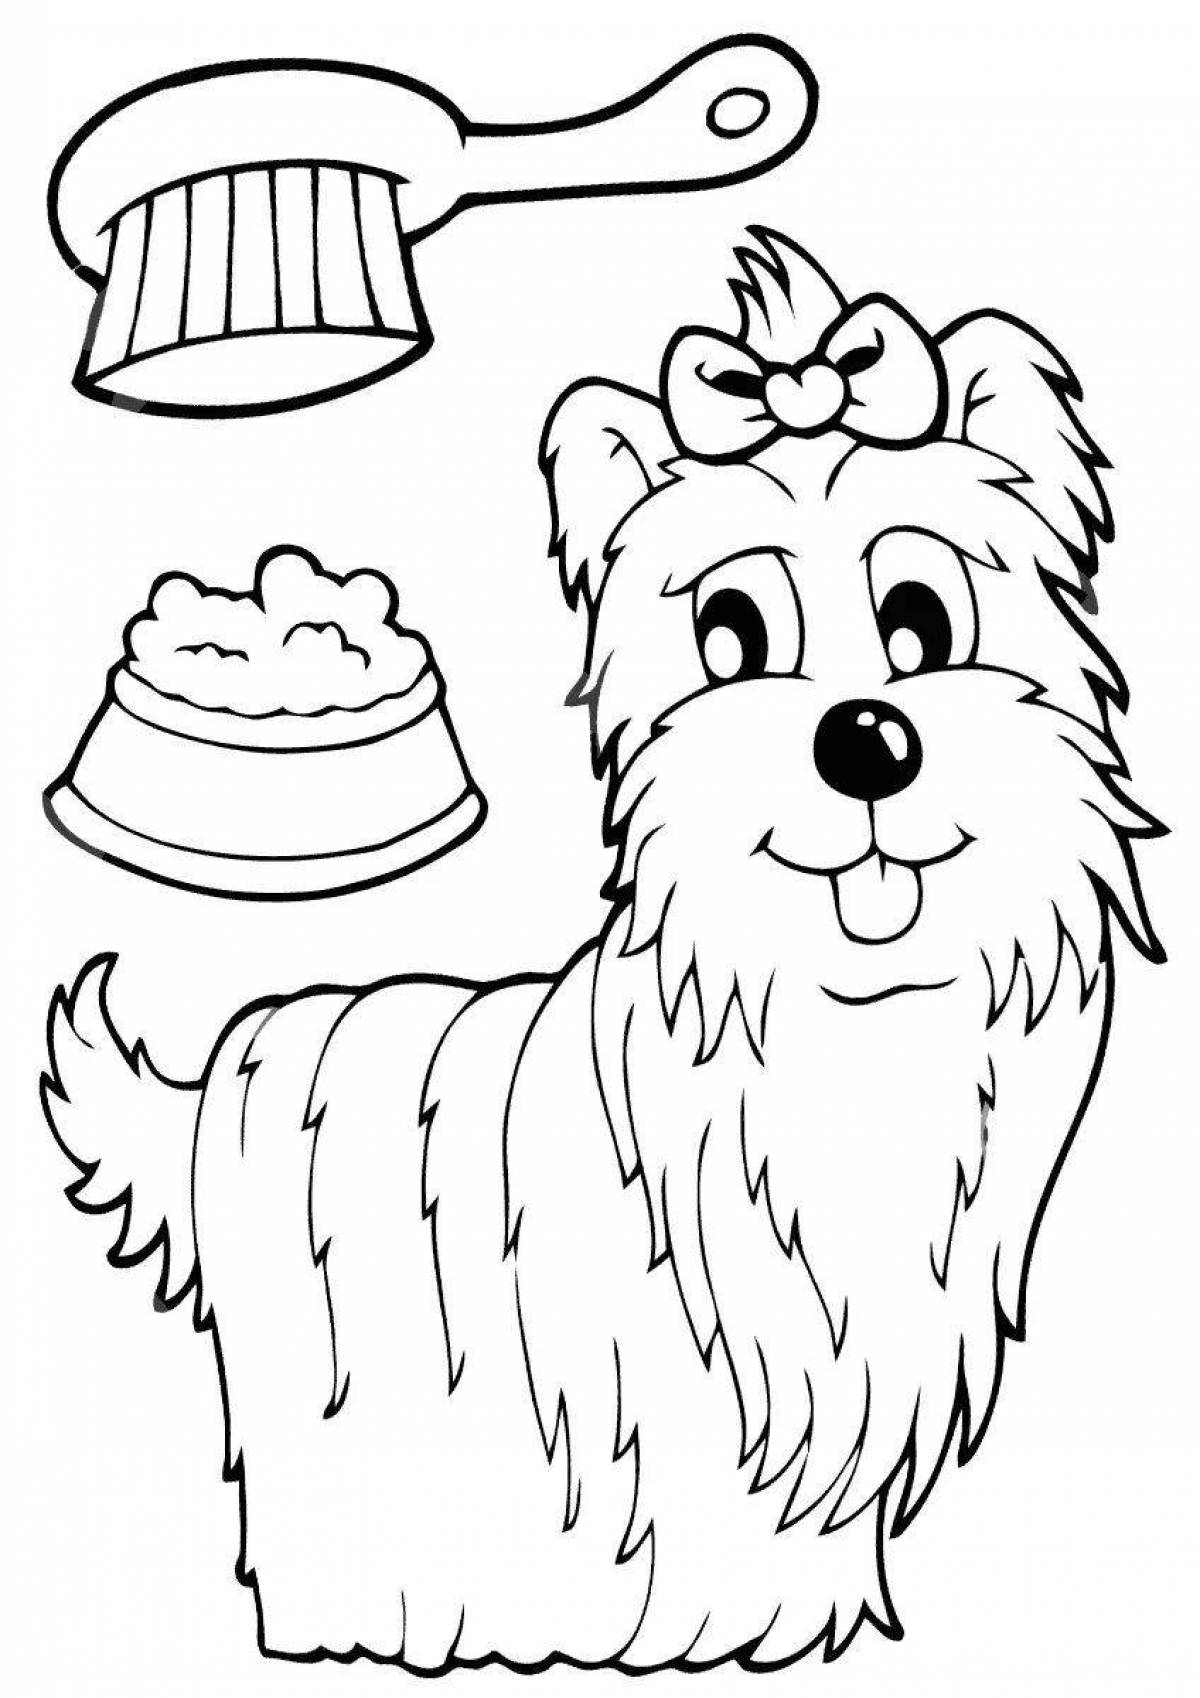 Colouring fluffy yorkshire terrier